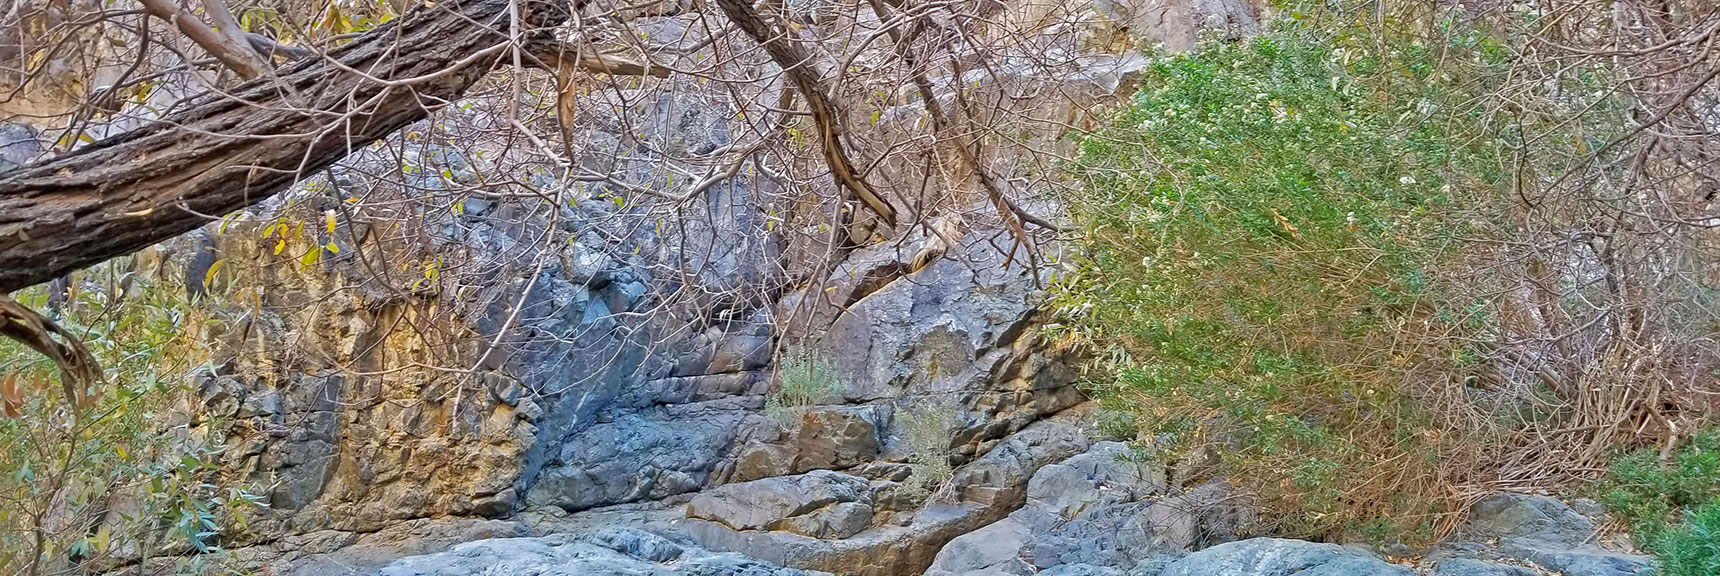 Another Stream Crossing. Second Rock Scramble Ahead. | Darwin Falls, Death Valley National Park, California